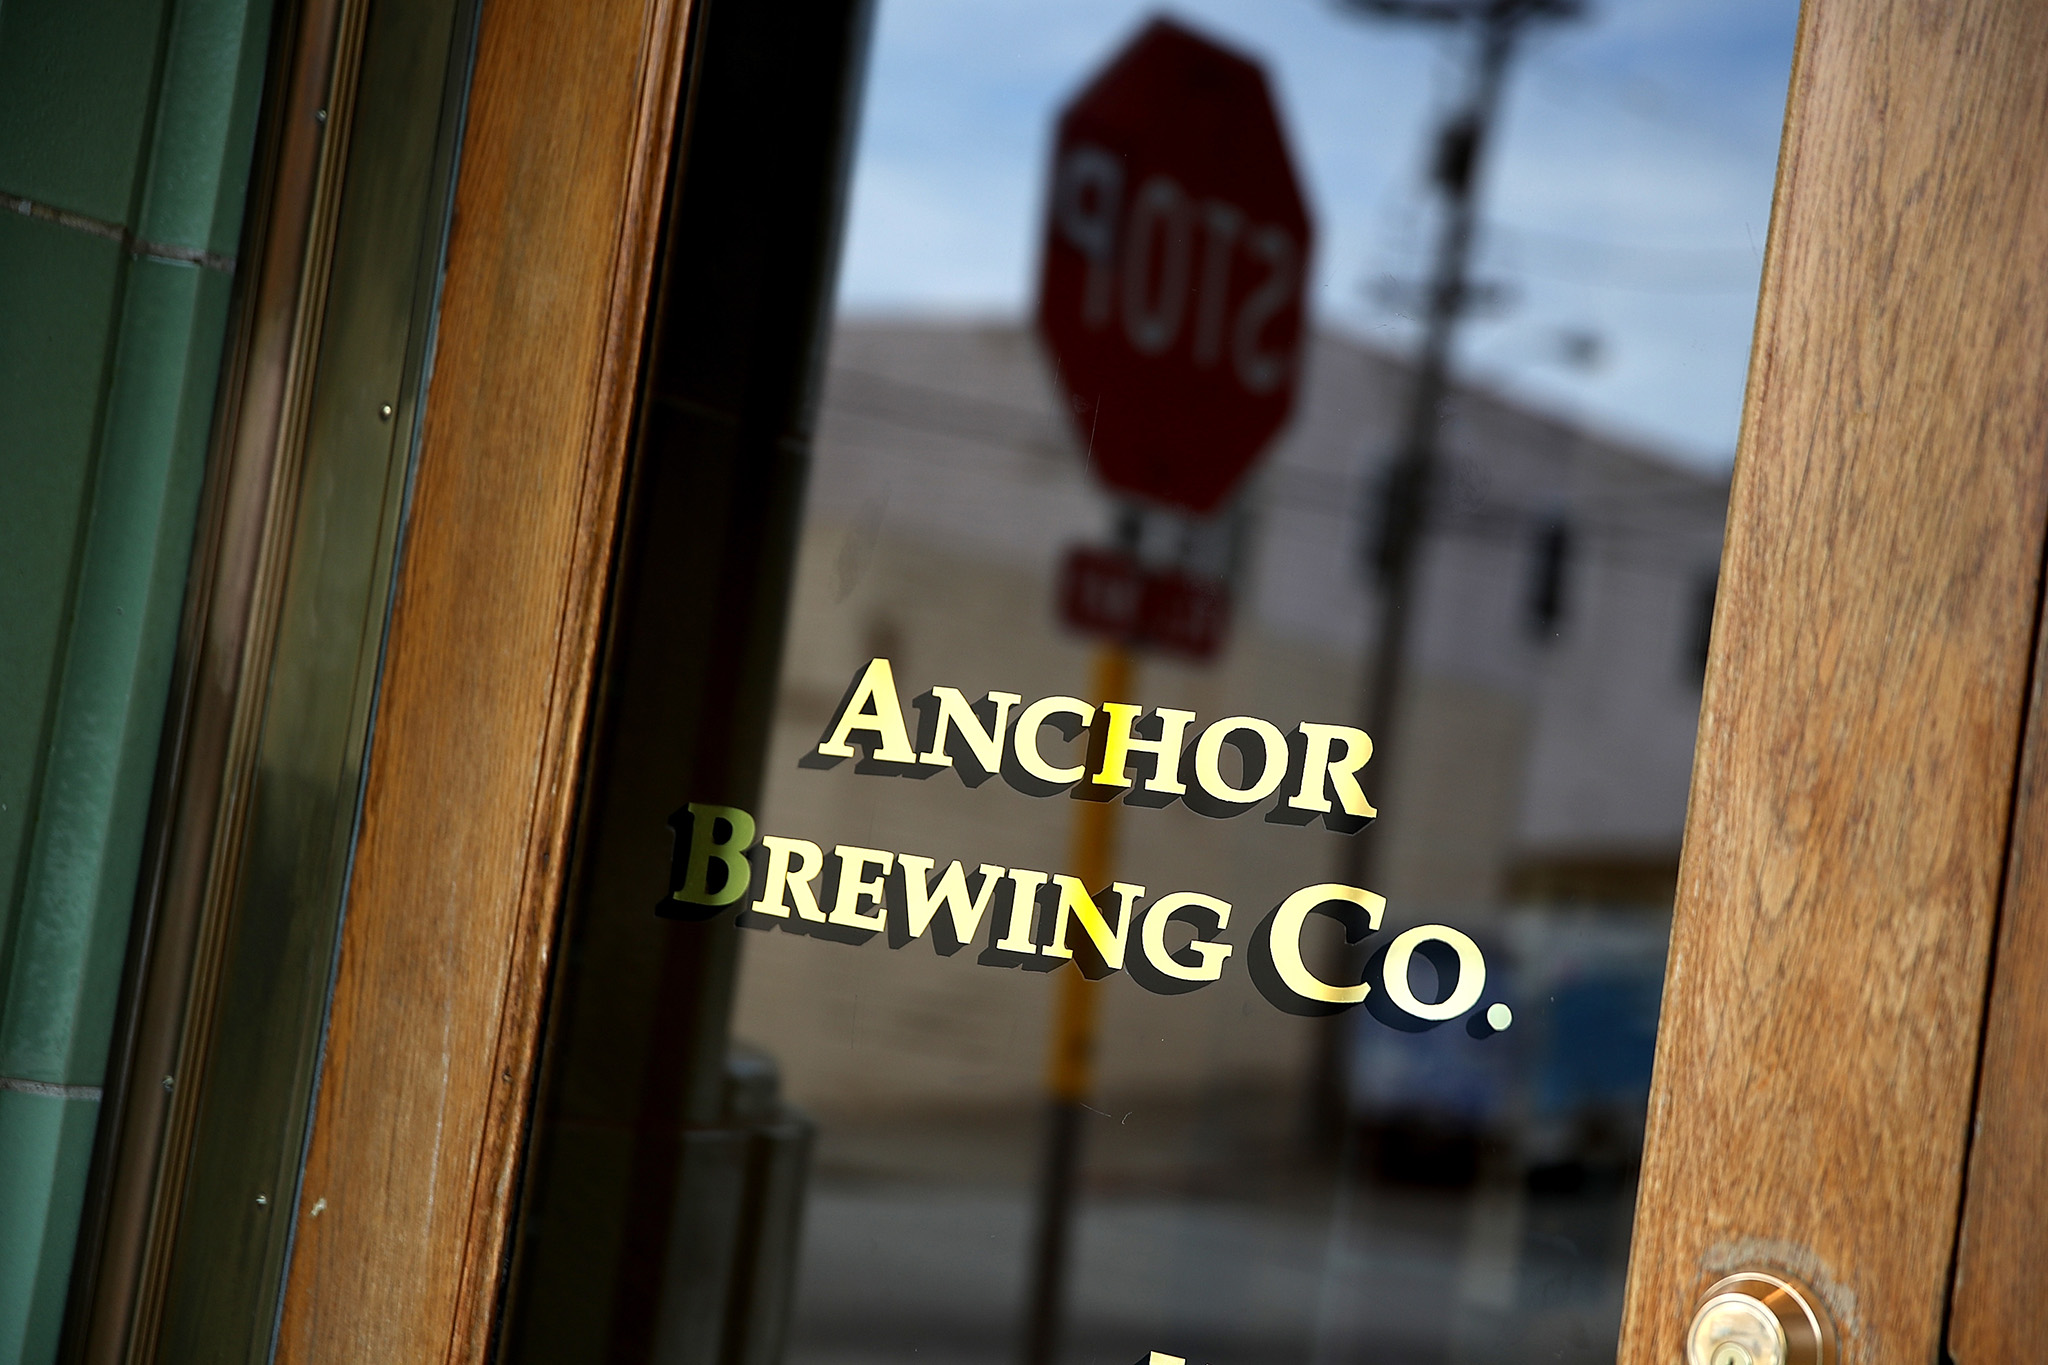 San Francisco’s Anchor Brewing Company says it has ceased operations